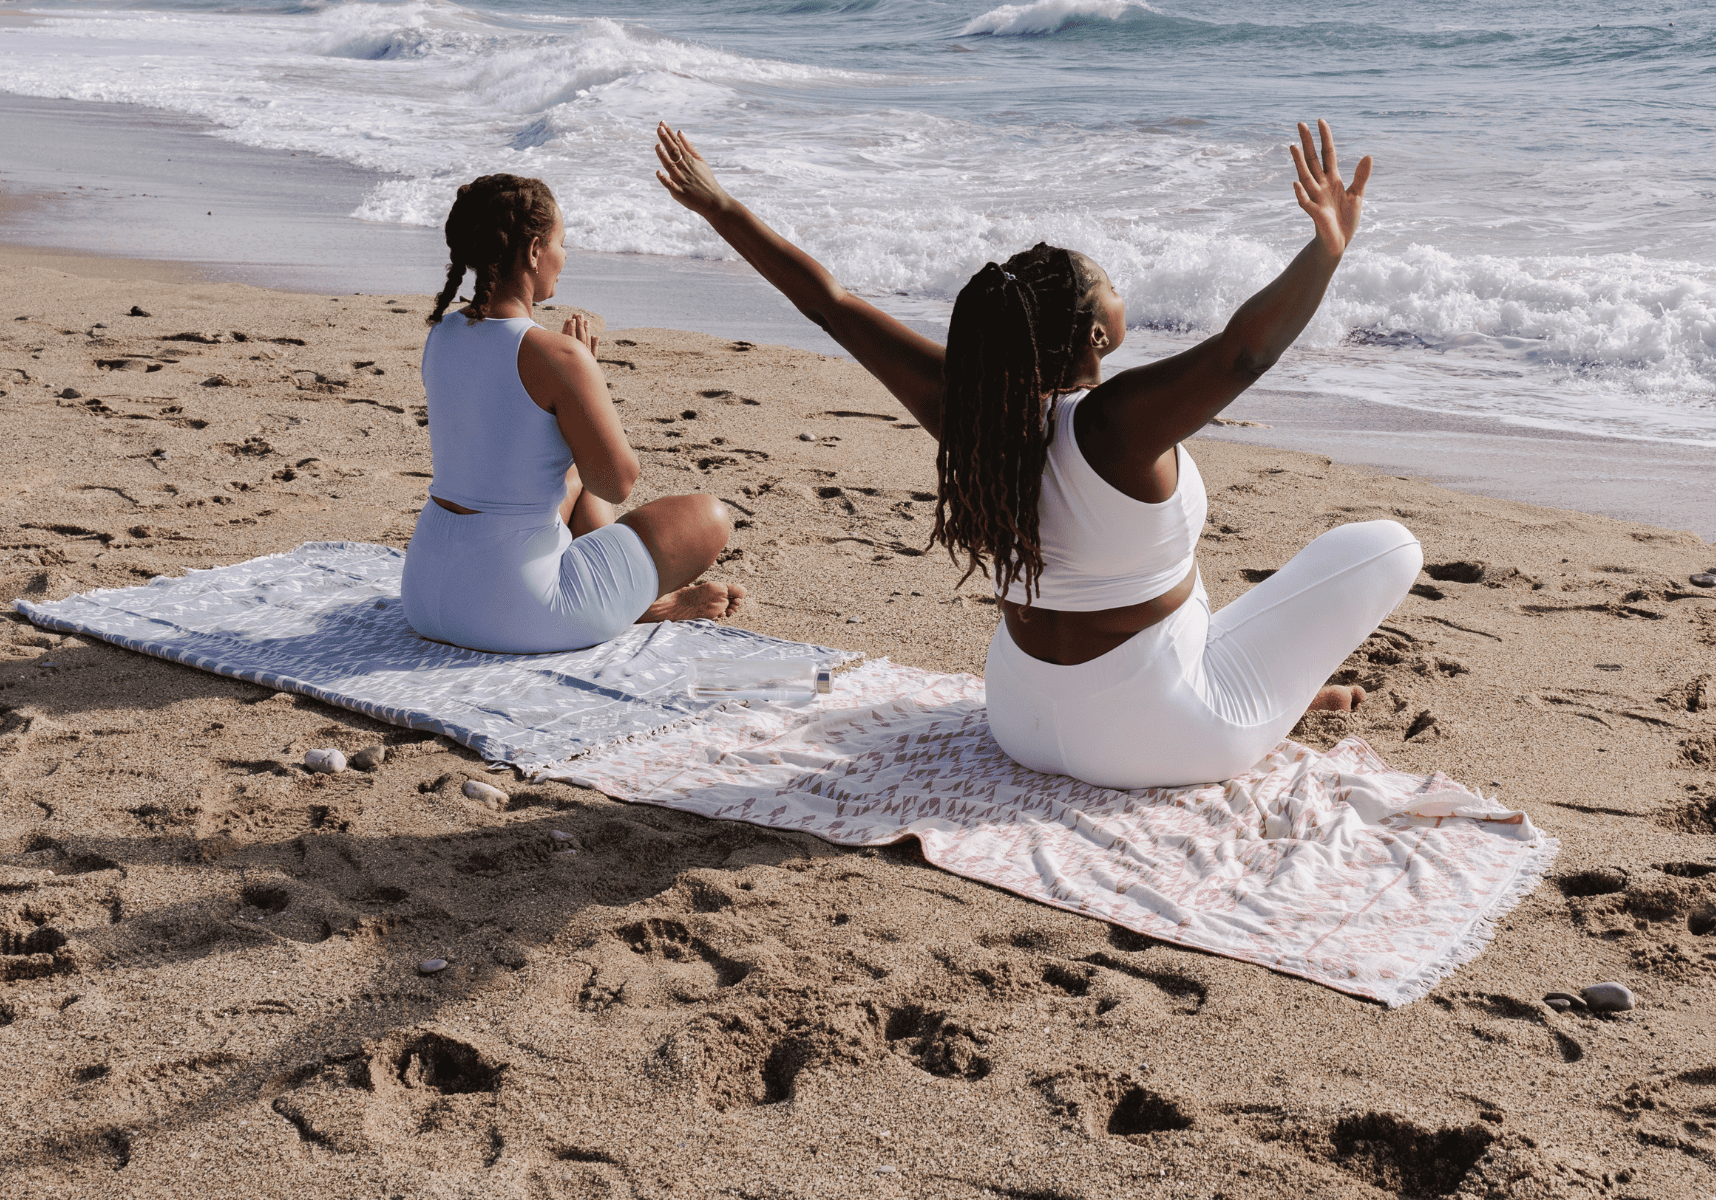 How Does Yoga Contribute to Environmental Wellness